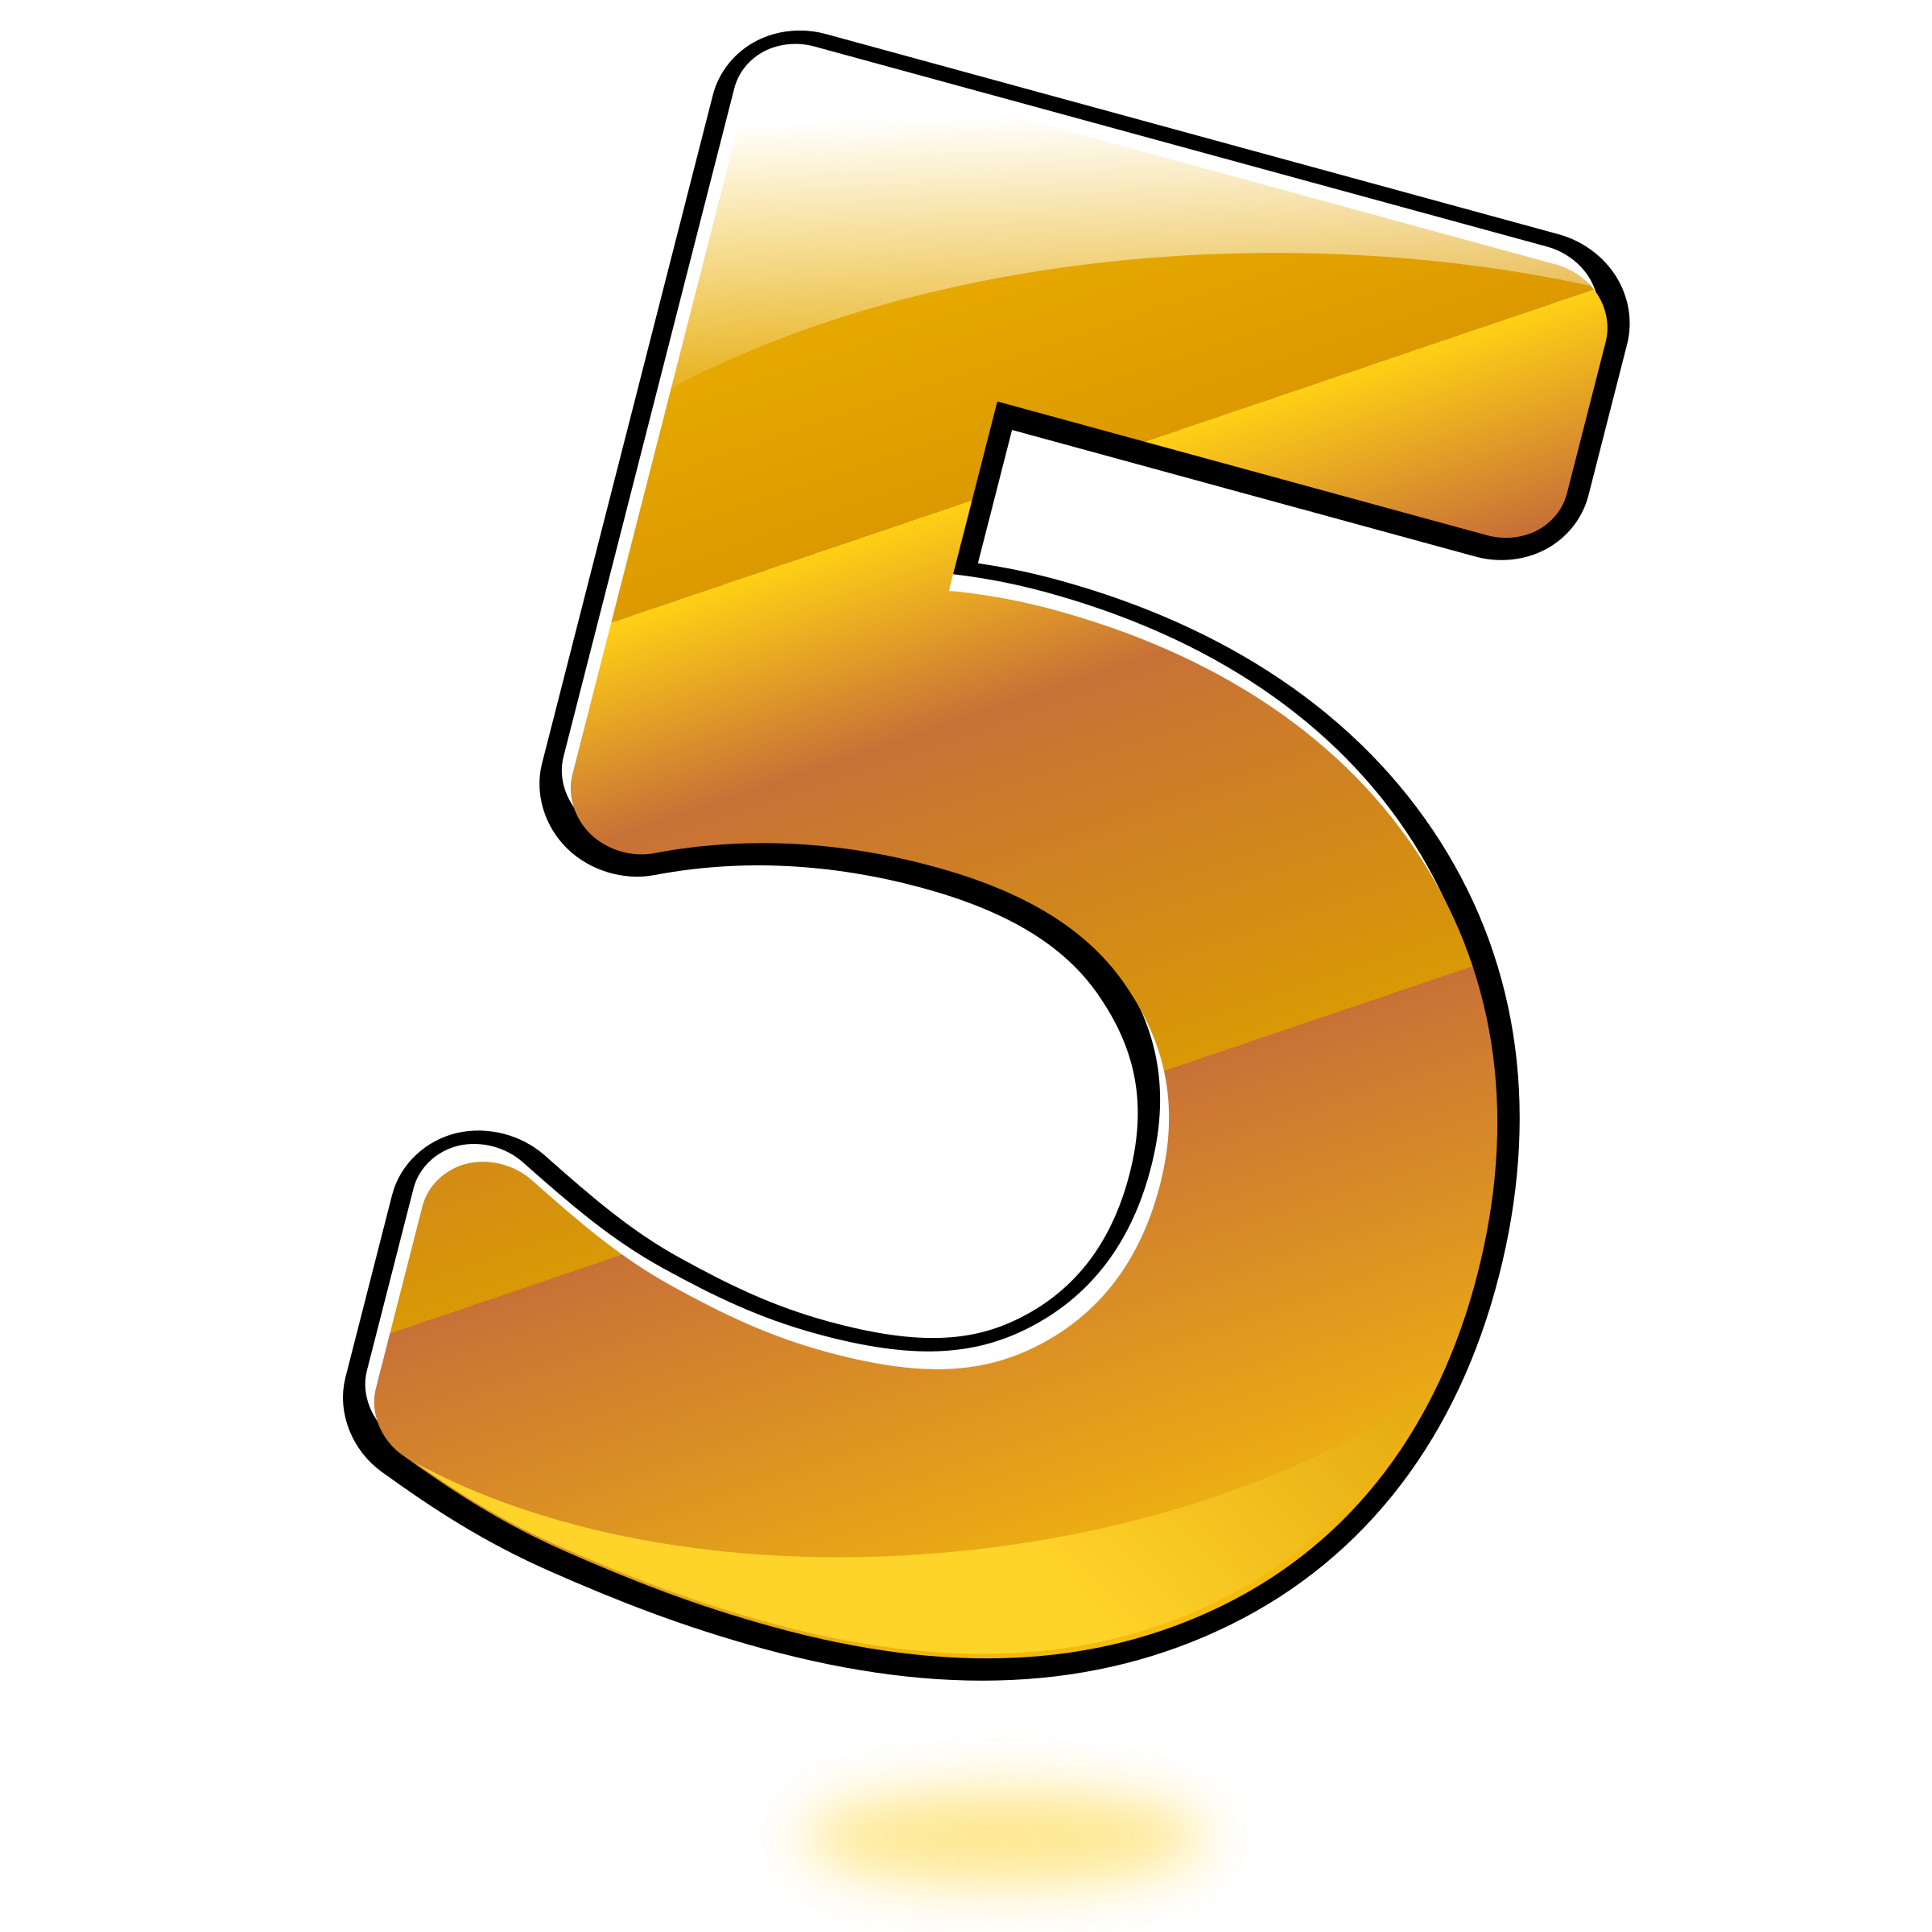 Five clipart - Clipground